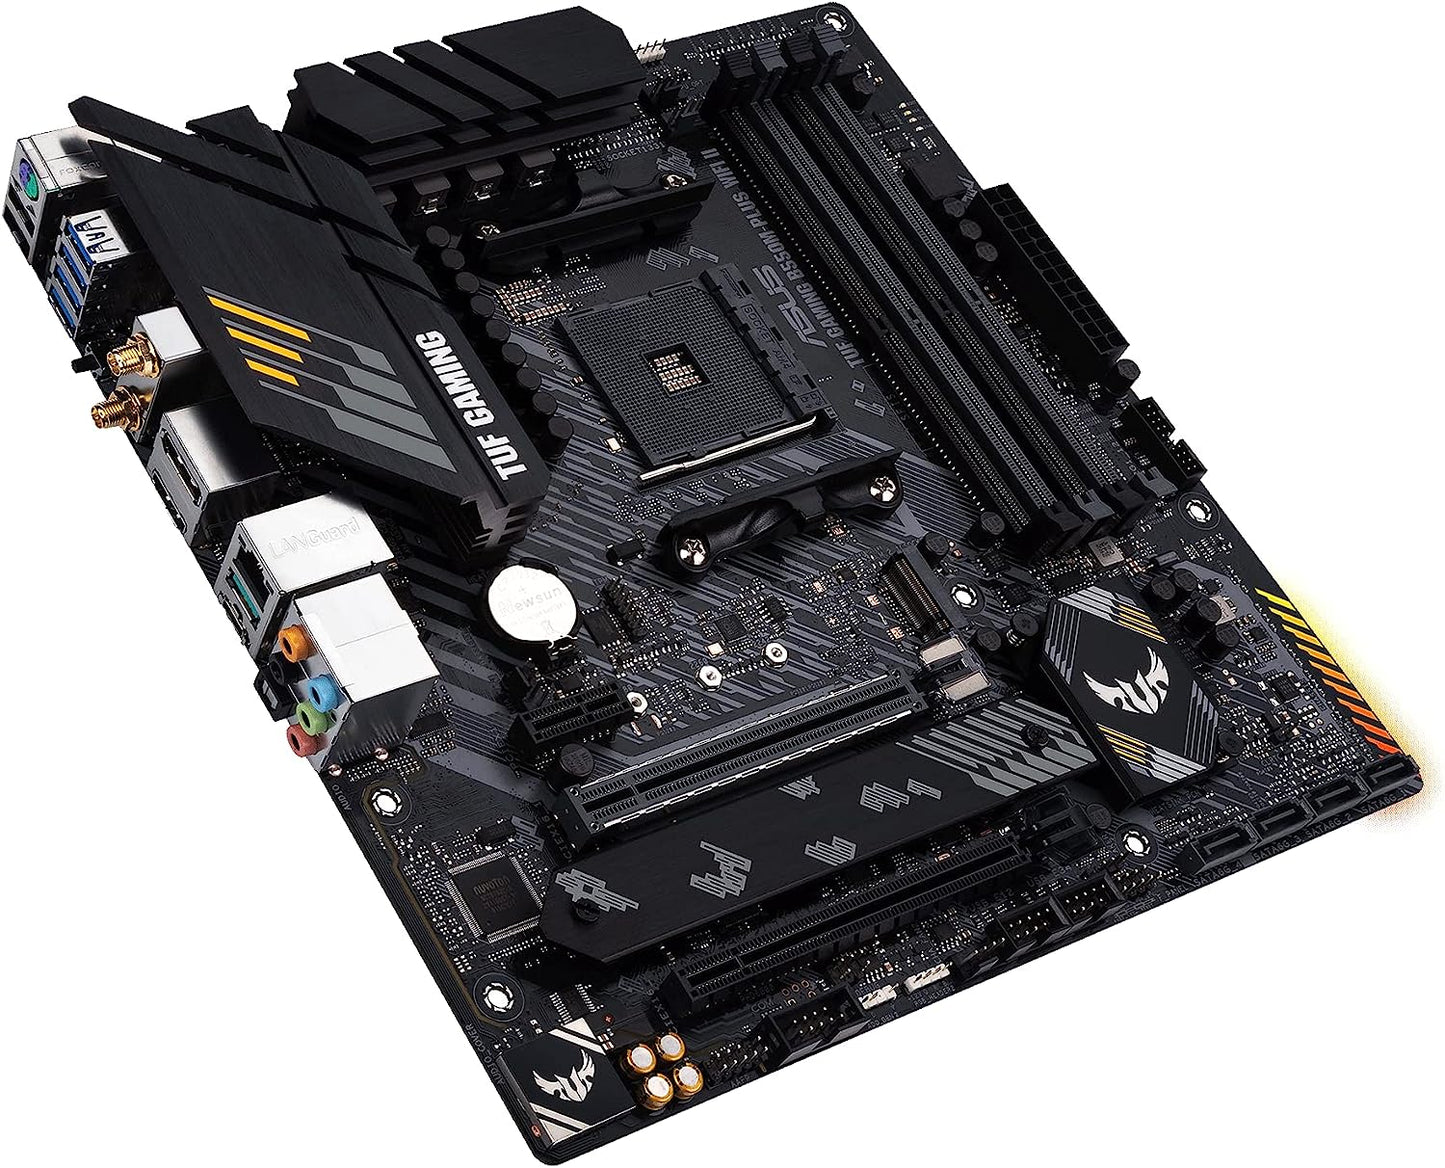 ASUS TUF GAMING B550M-PLUS WIFI II, AMD Ryzen™ 5000 Series/ 5000 G-Series/ 4000 G-Series/ 3000 Series/ 3000 G-Series Desktop Processors, PCIe 4.0 M.2, USB 3.2 Gen 2 Type-A and Type-C® support